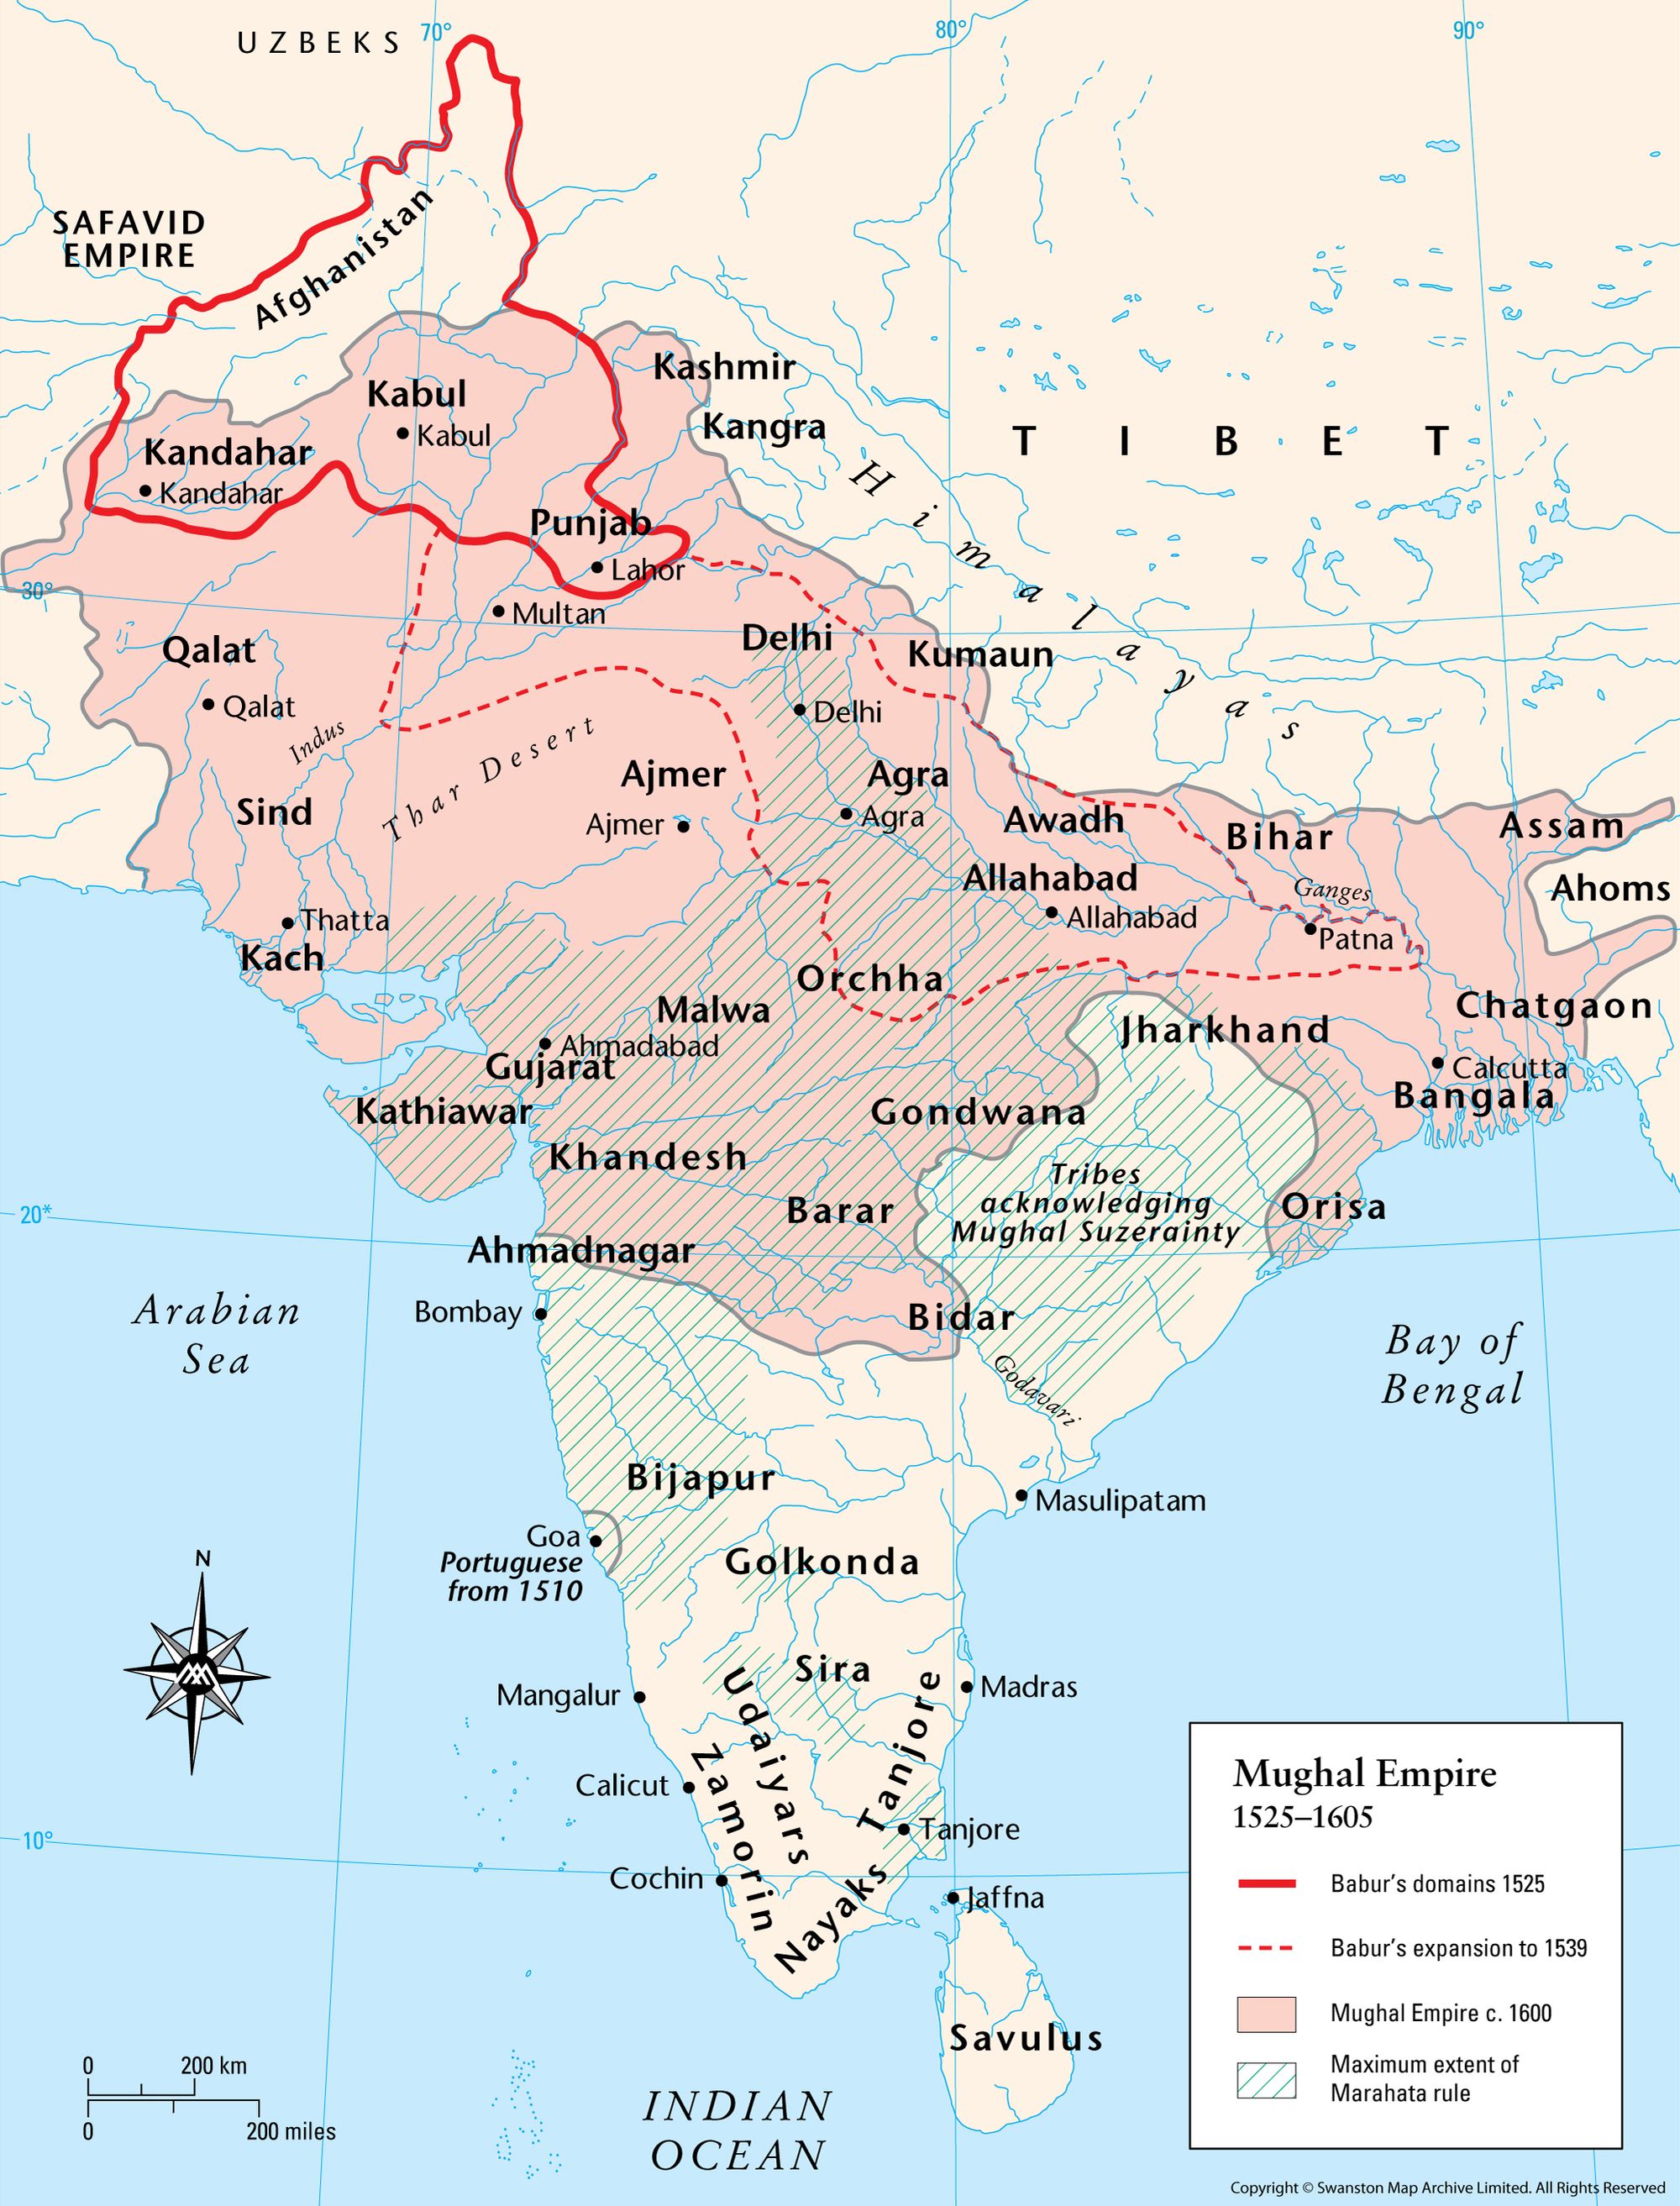 History Grade 10 - Topic 1 The Mughal Empire | South African History Online